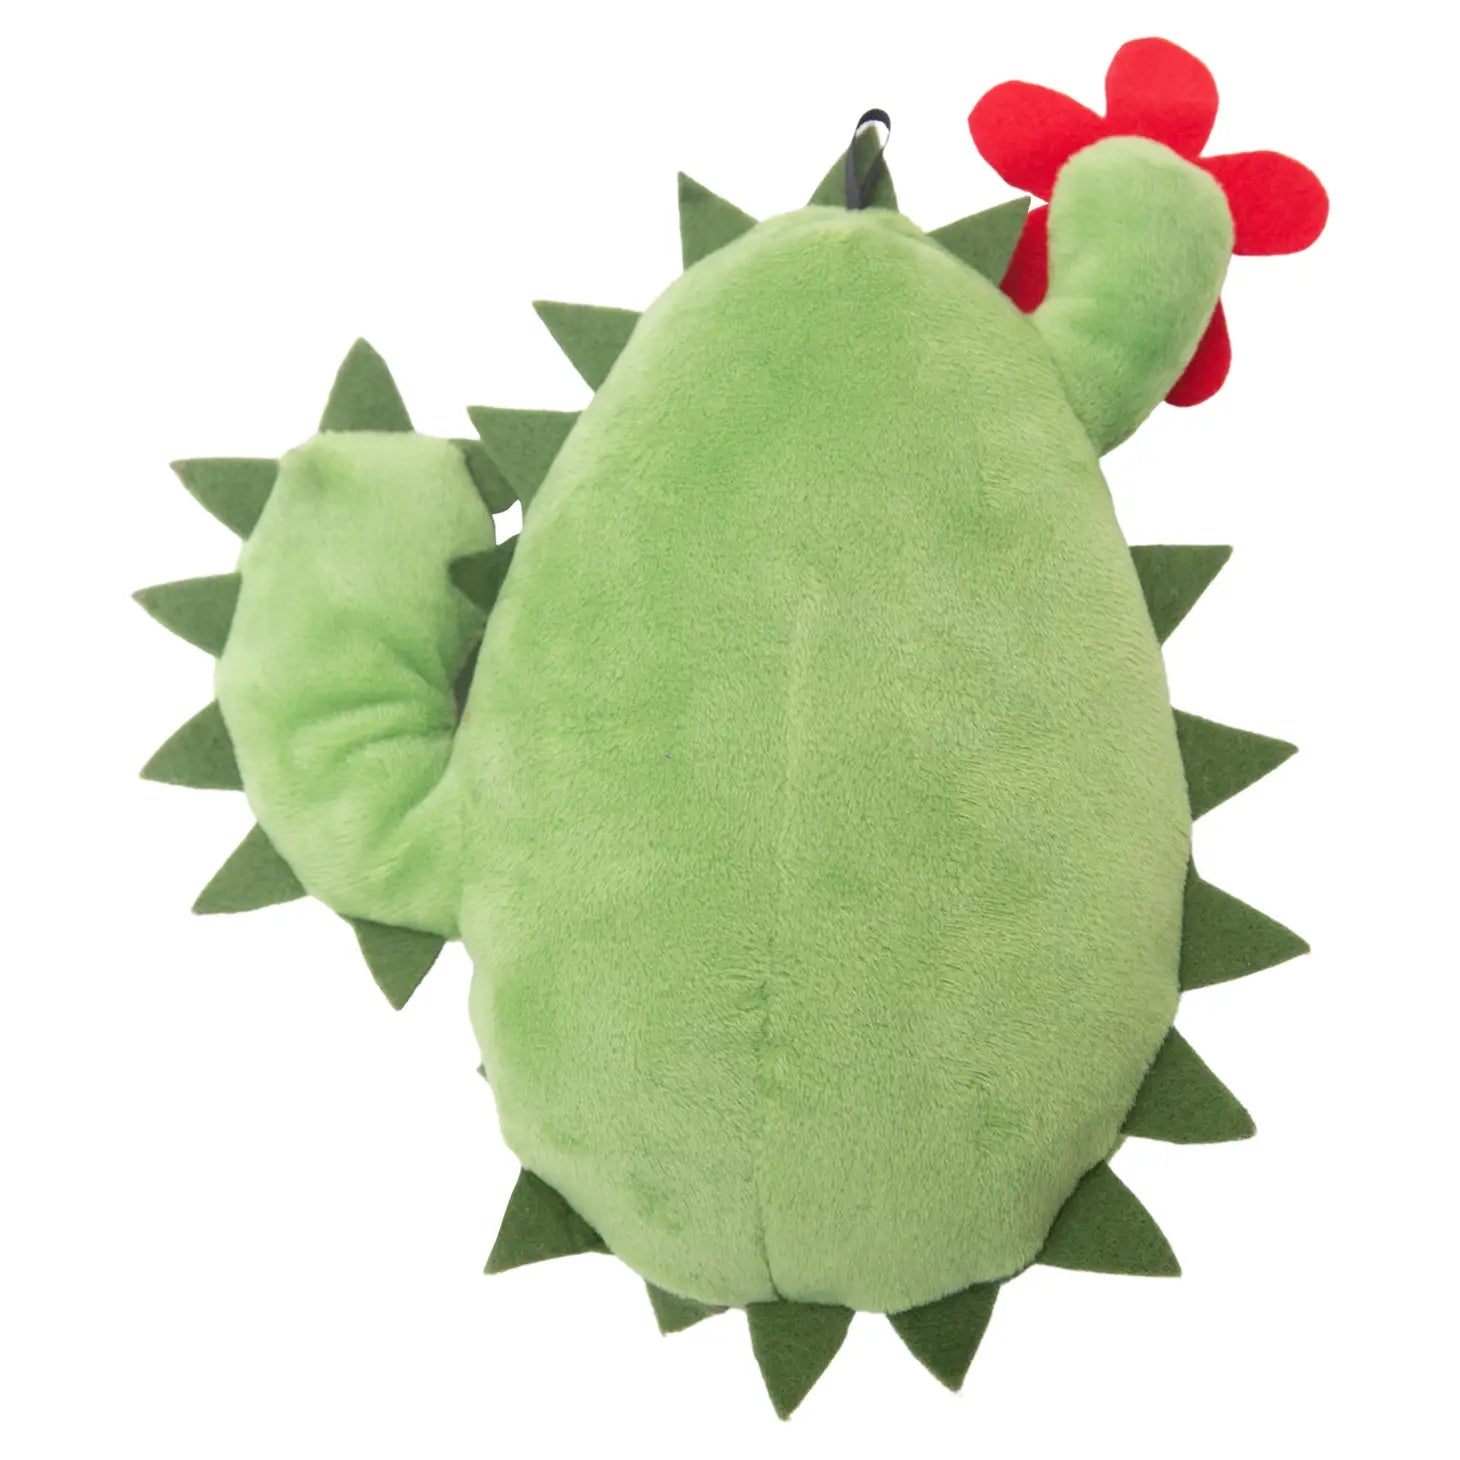 Isolated rear view of a plushy cactus dog toy with a red flower